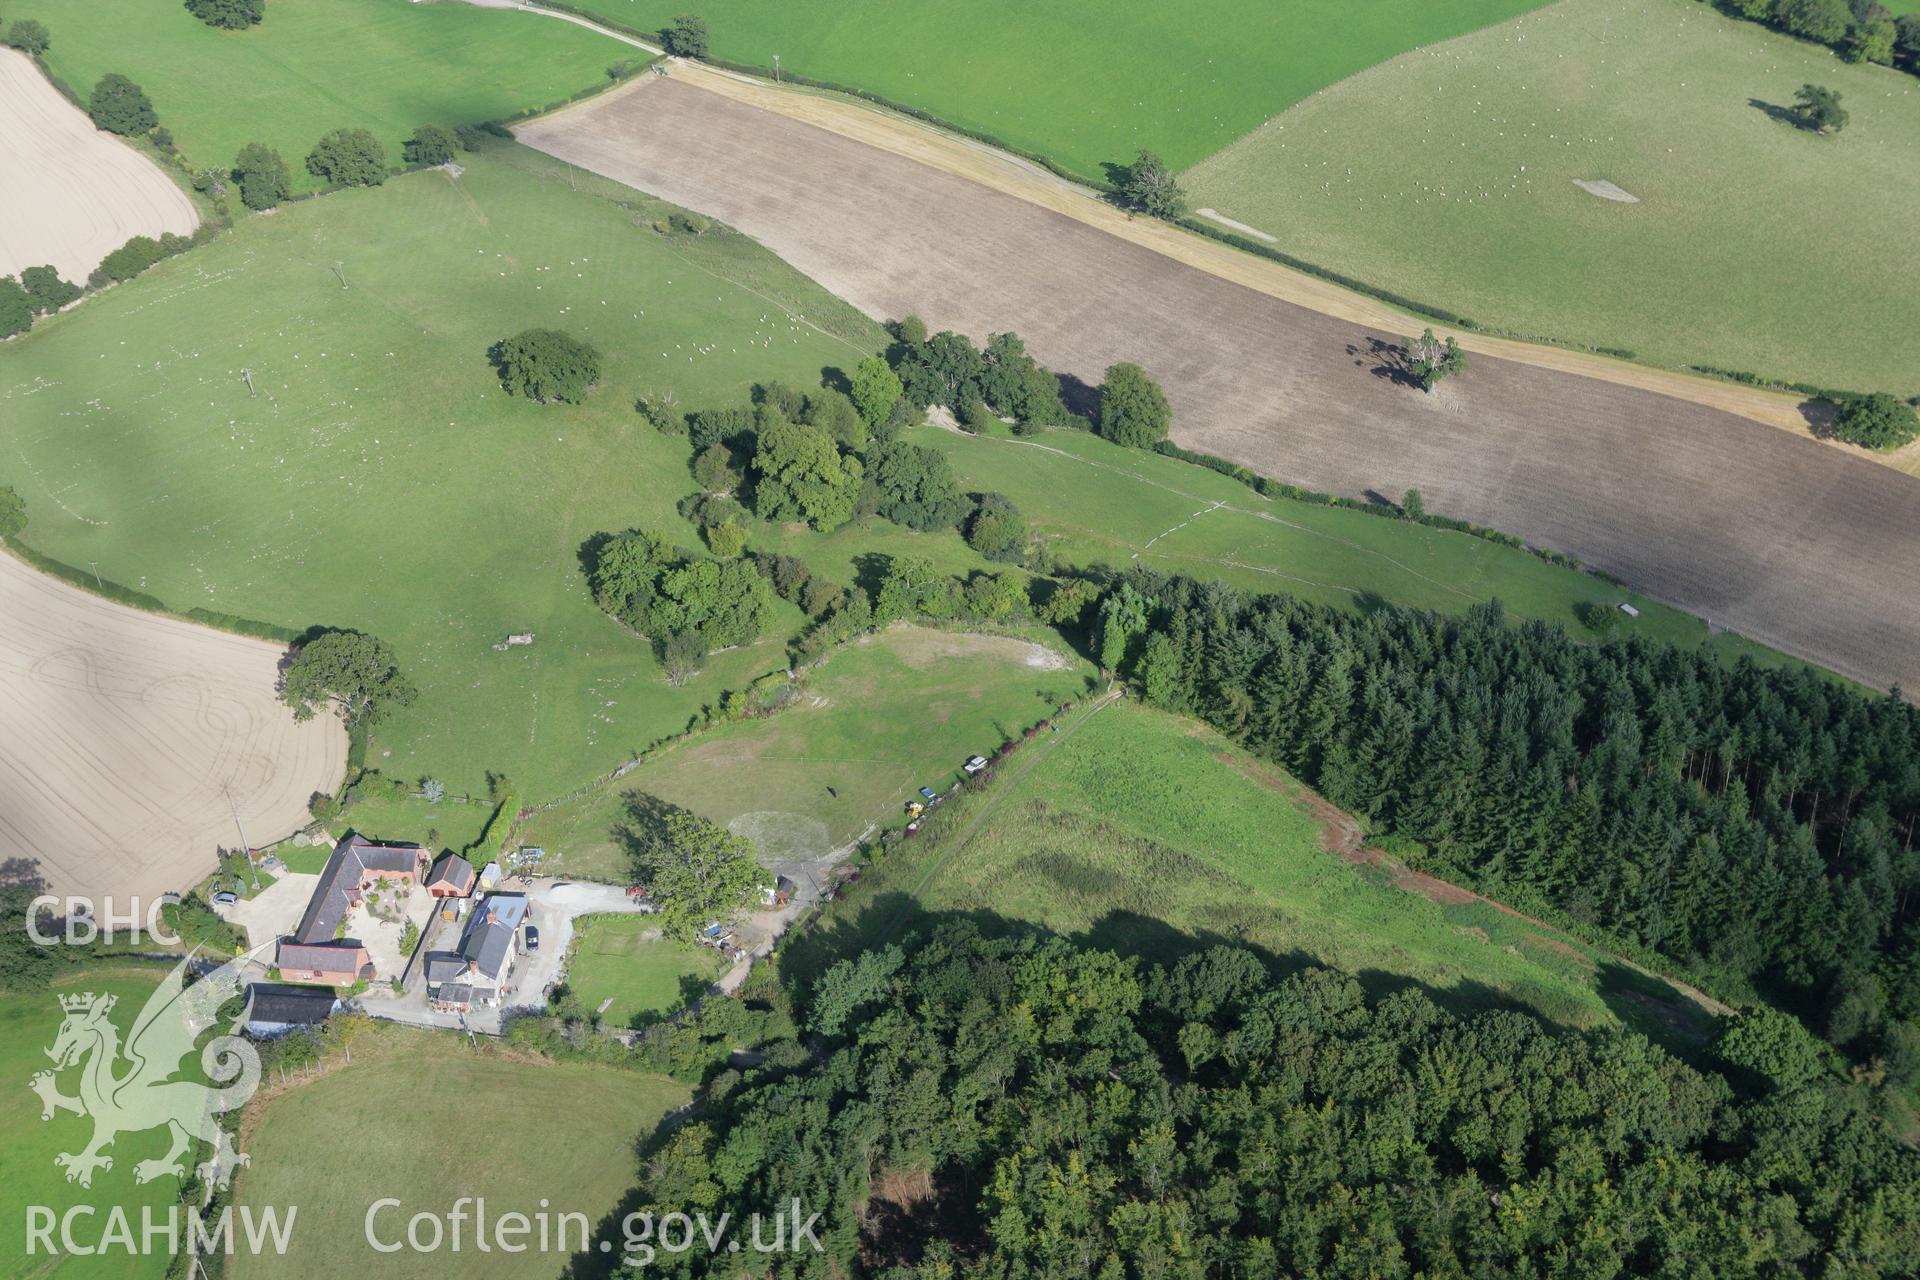 RCAHMW colour oblique aerial photograph of Crowther's Camp Enclosure. Taken on 06 September 2007 by Toby Driver